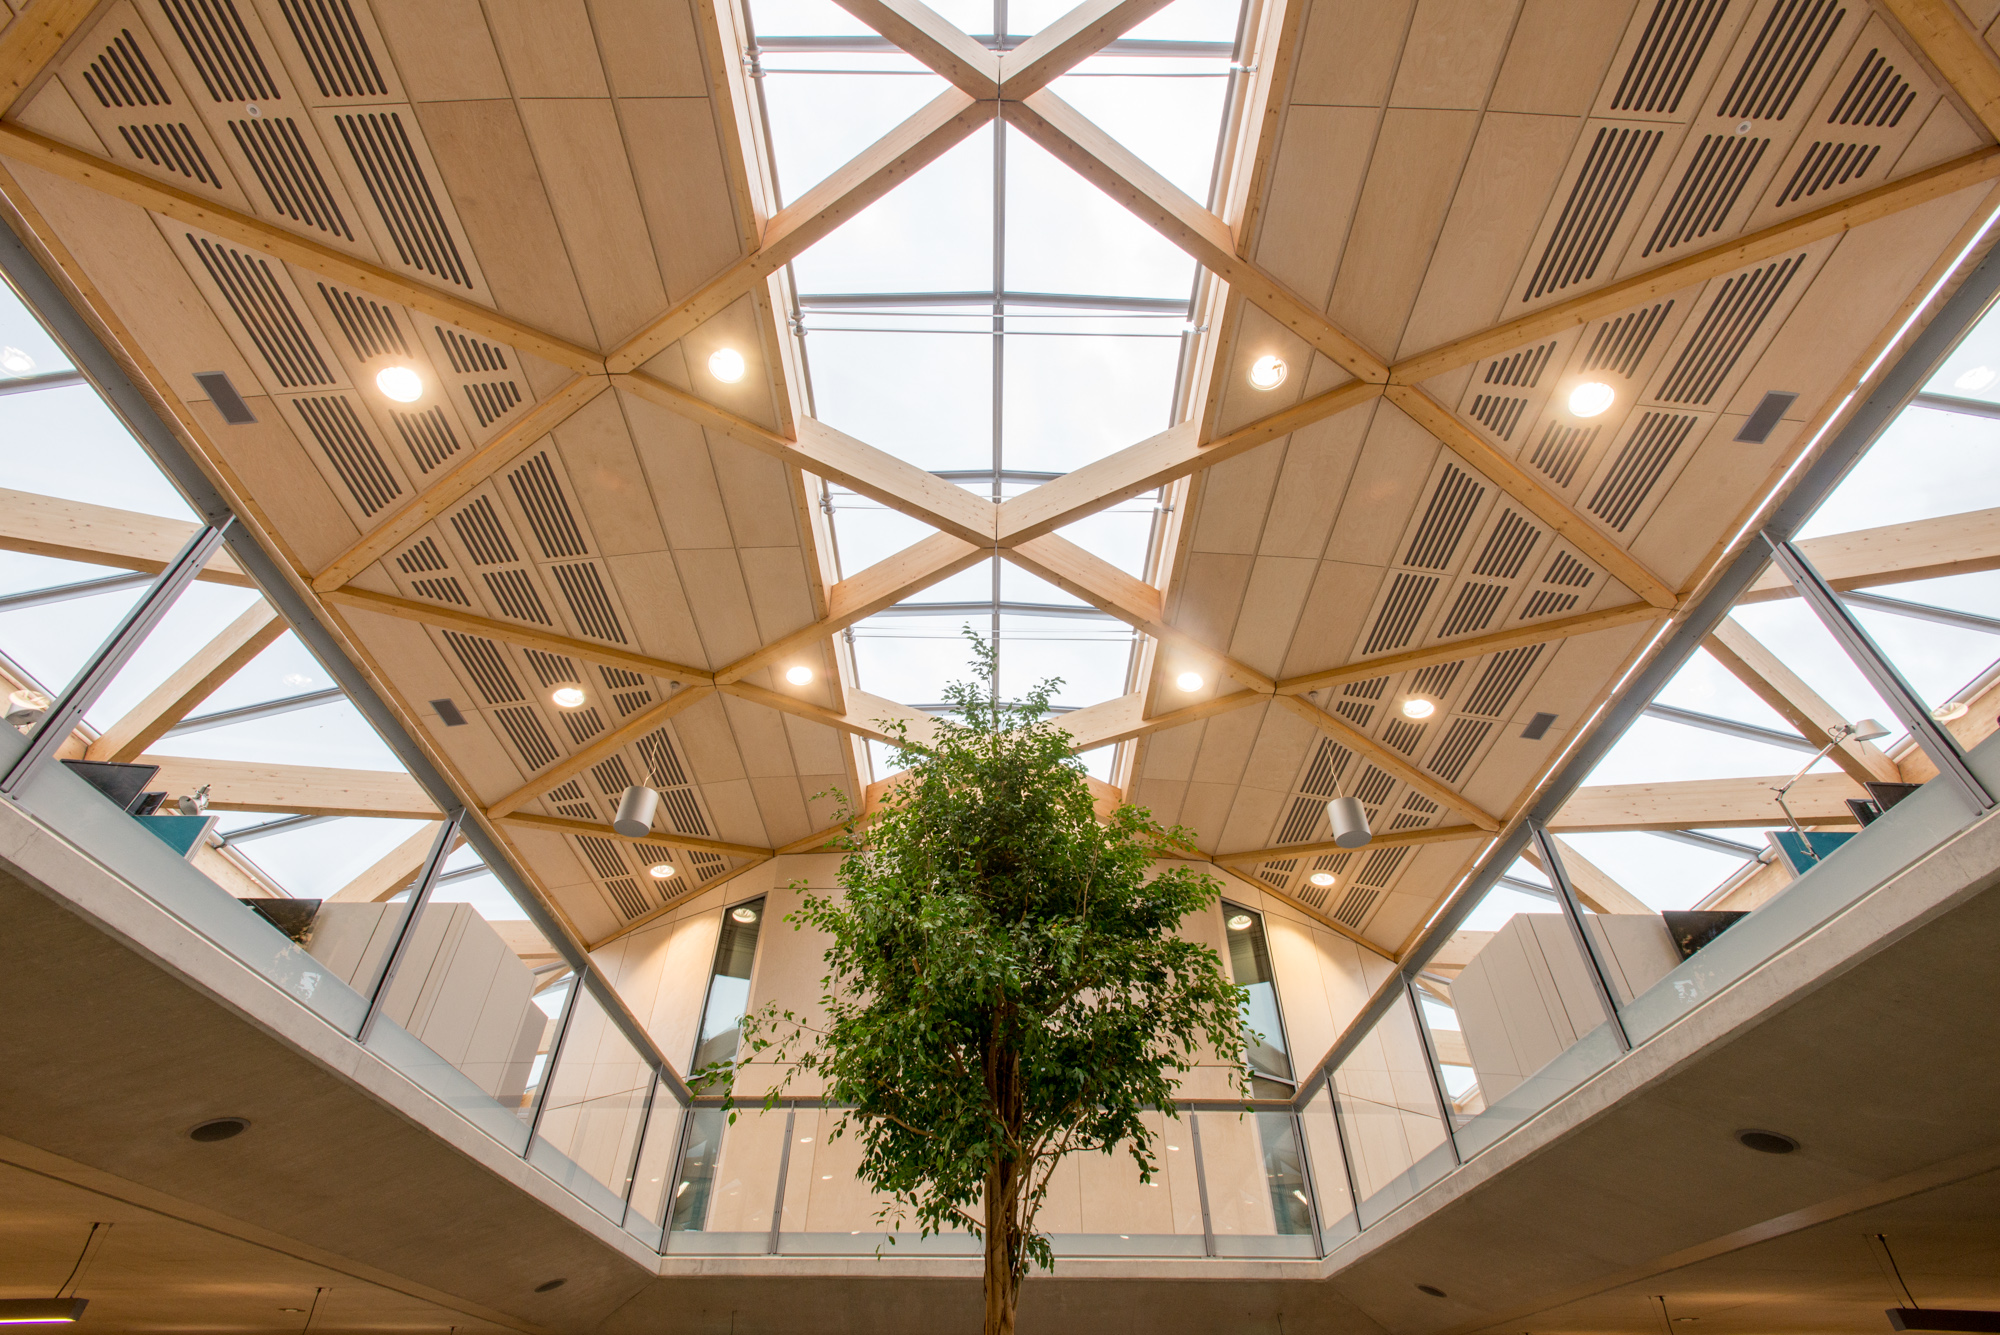 WWF UK HQ, Woking with architectural and interior photography by Richard Stonehouse ,architectural photographer.